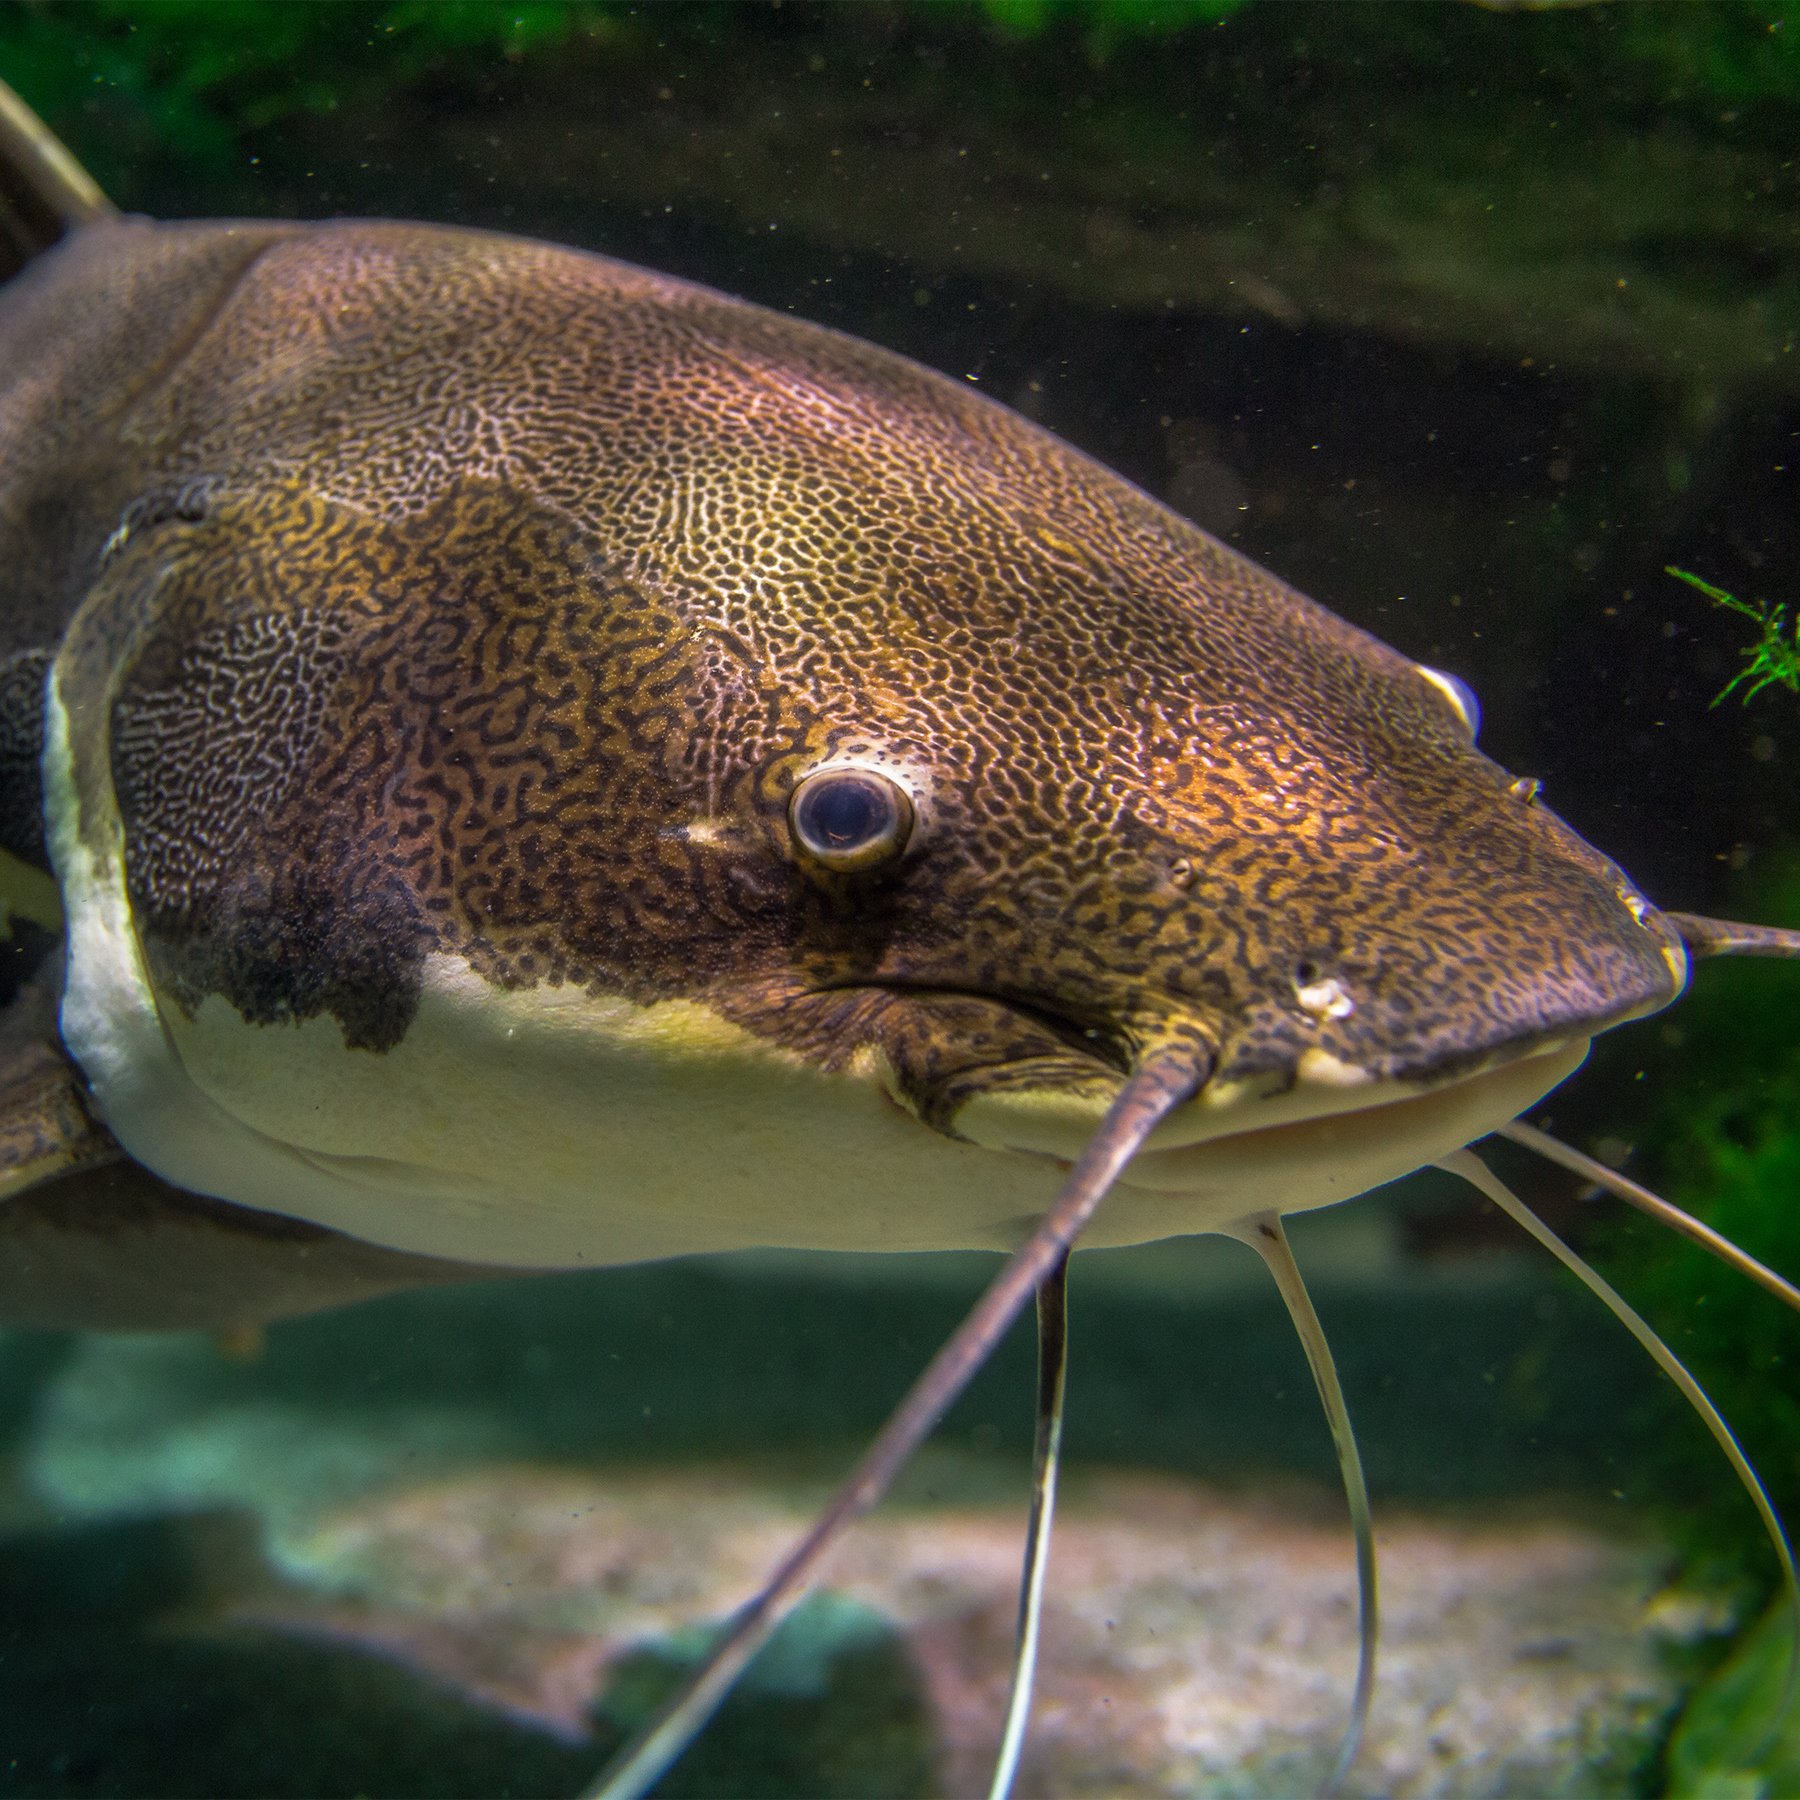 National Aquarium on X: A red-tailed catfish's long, whisker-like barbels  are used to hunt for prey. Equipped with chemical reception cells, these  barbels strengthen the catfish's sense of smell in the murky